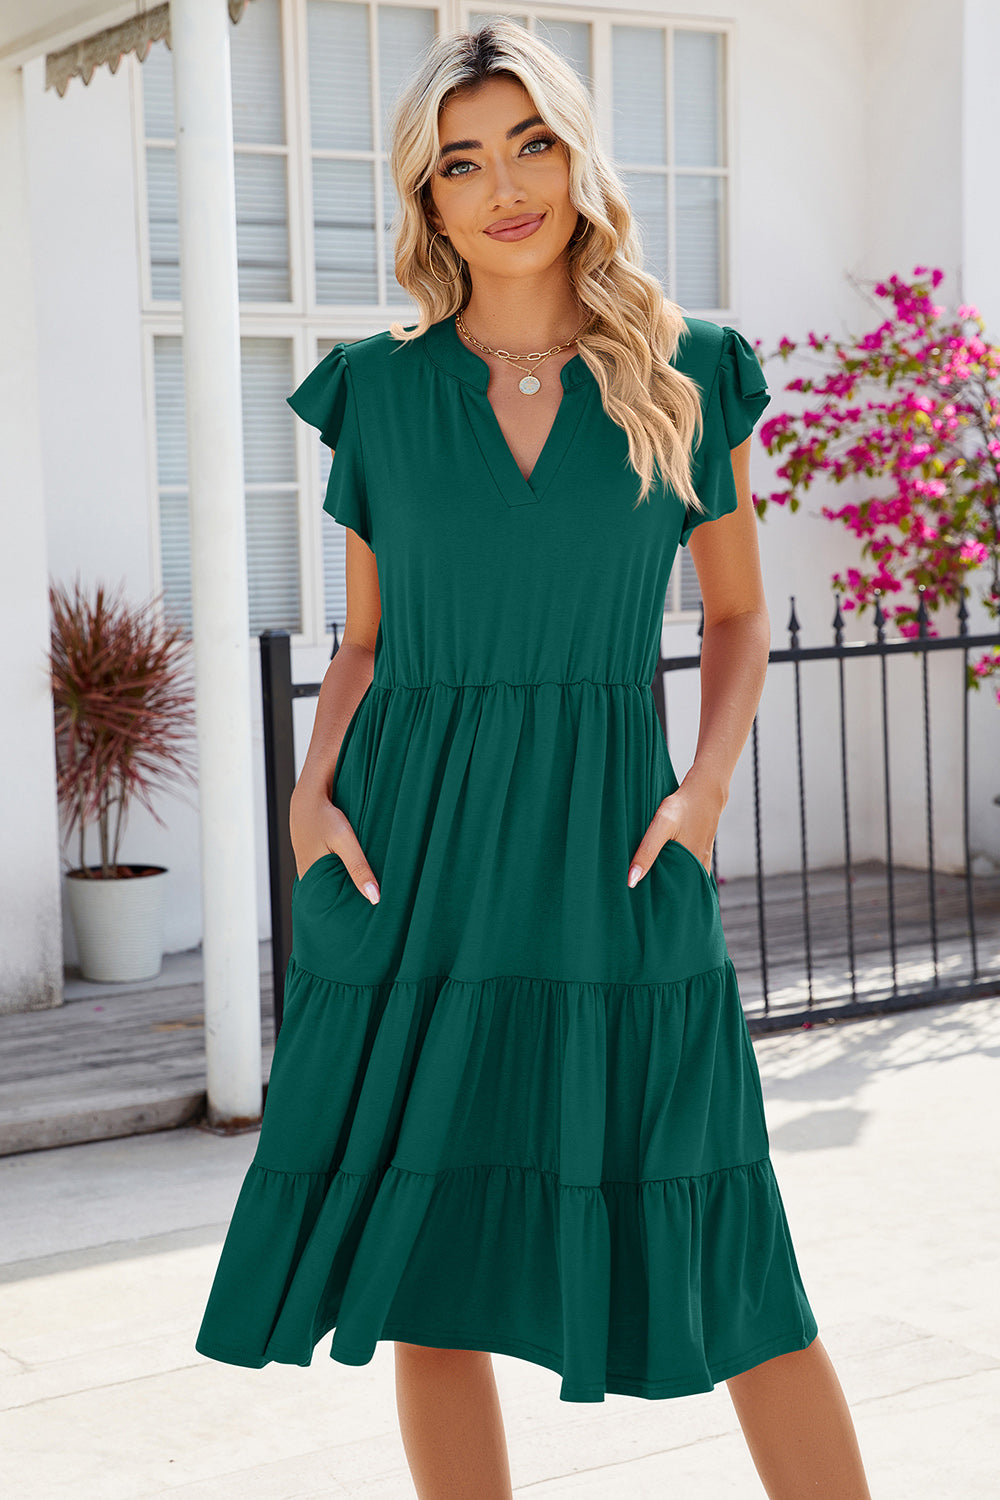 Ruched Notched Cap Sleeve Dress - Babbazon cocktail dress